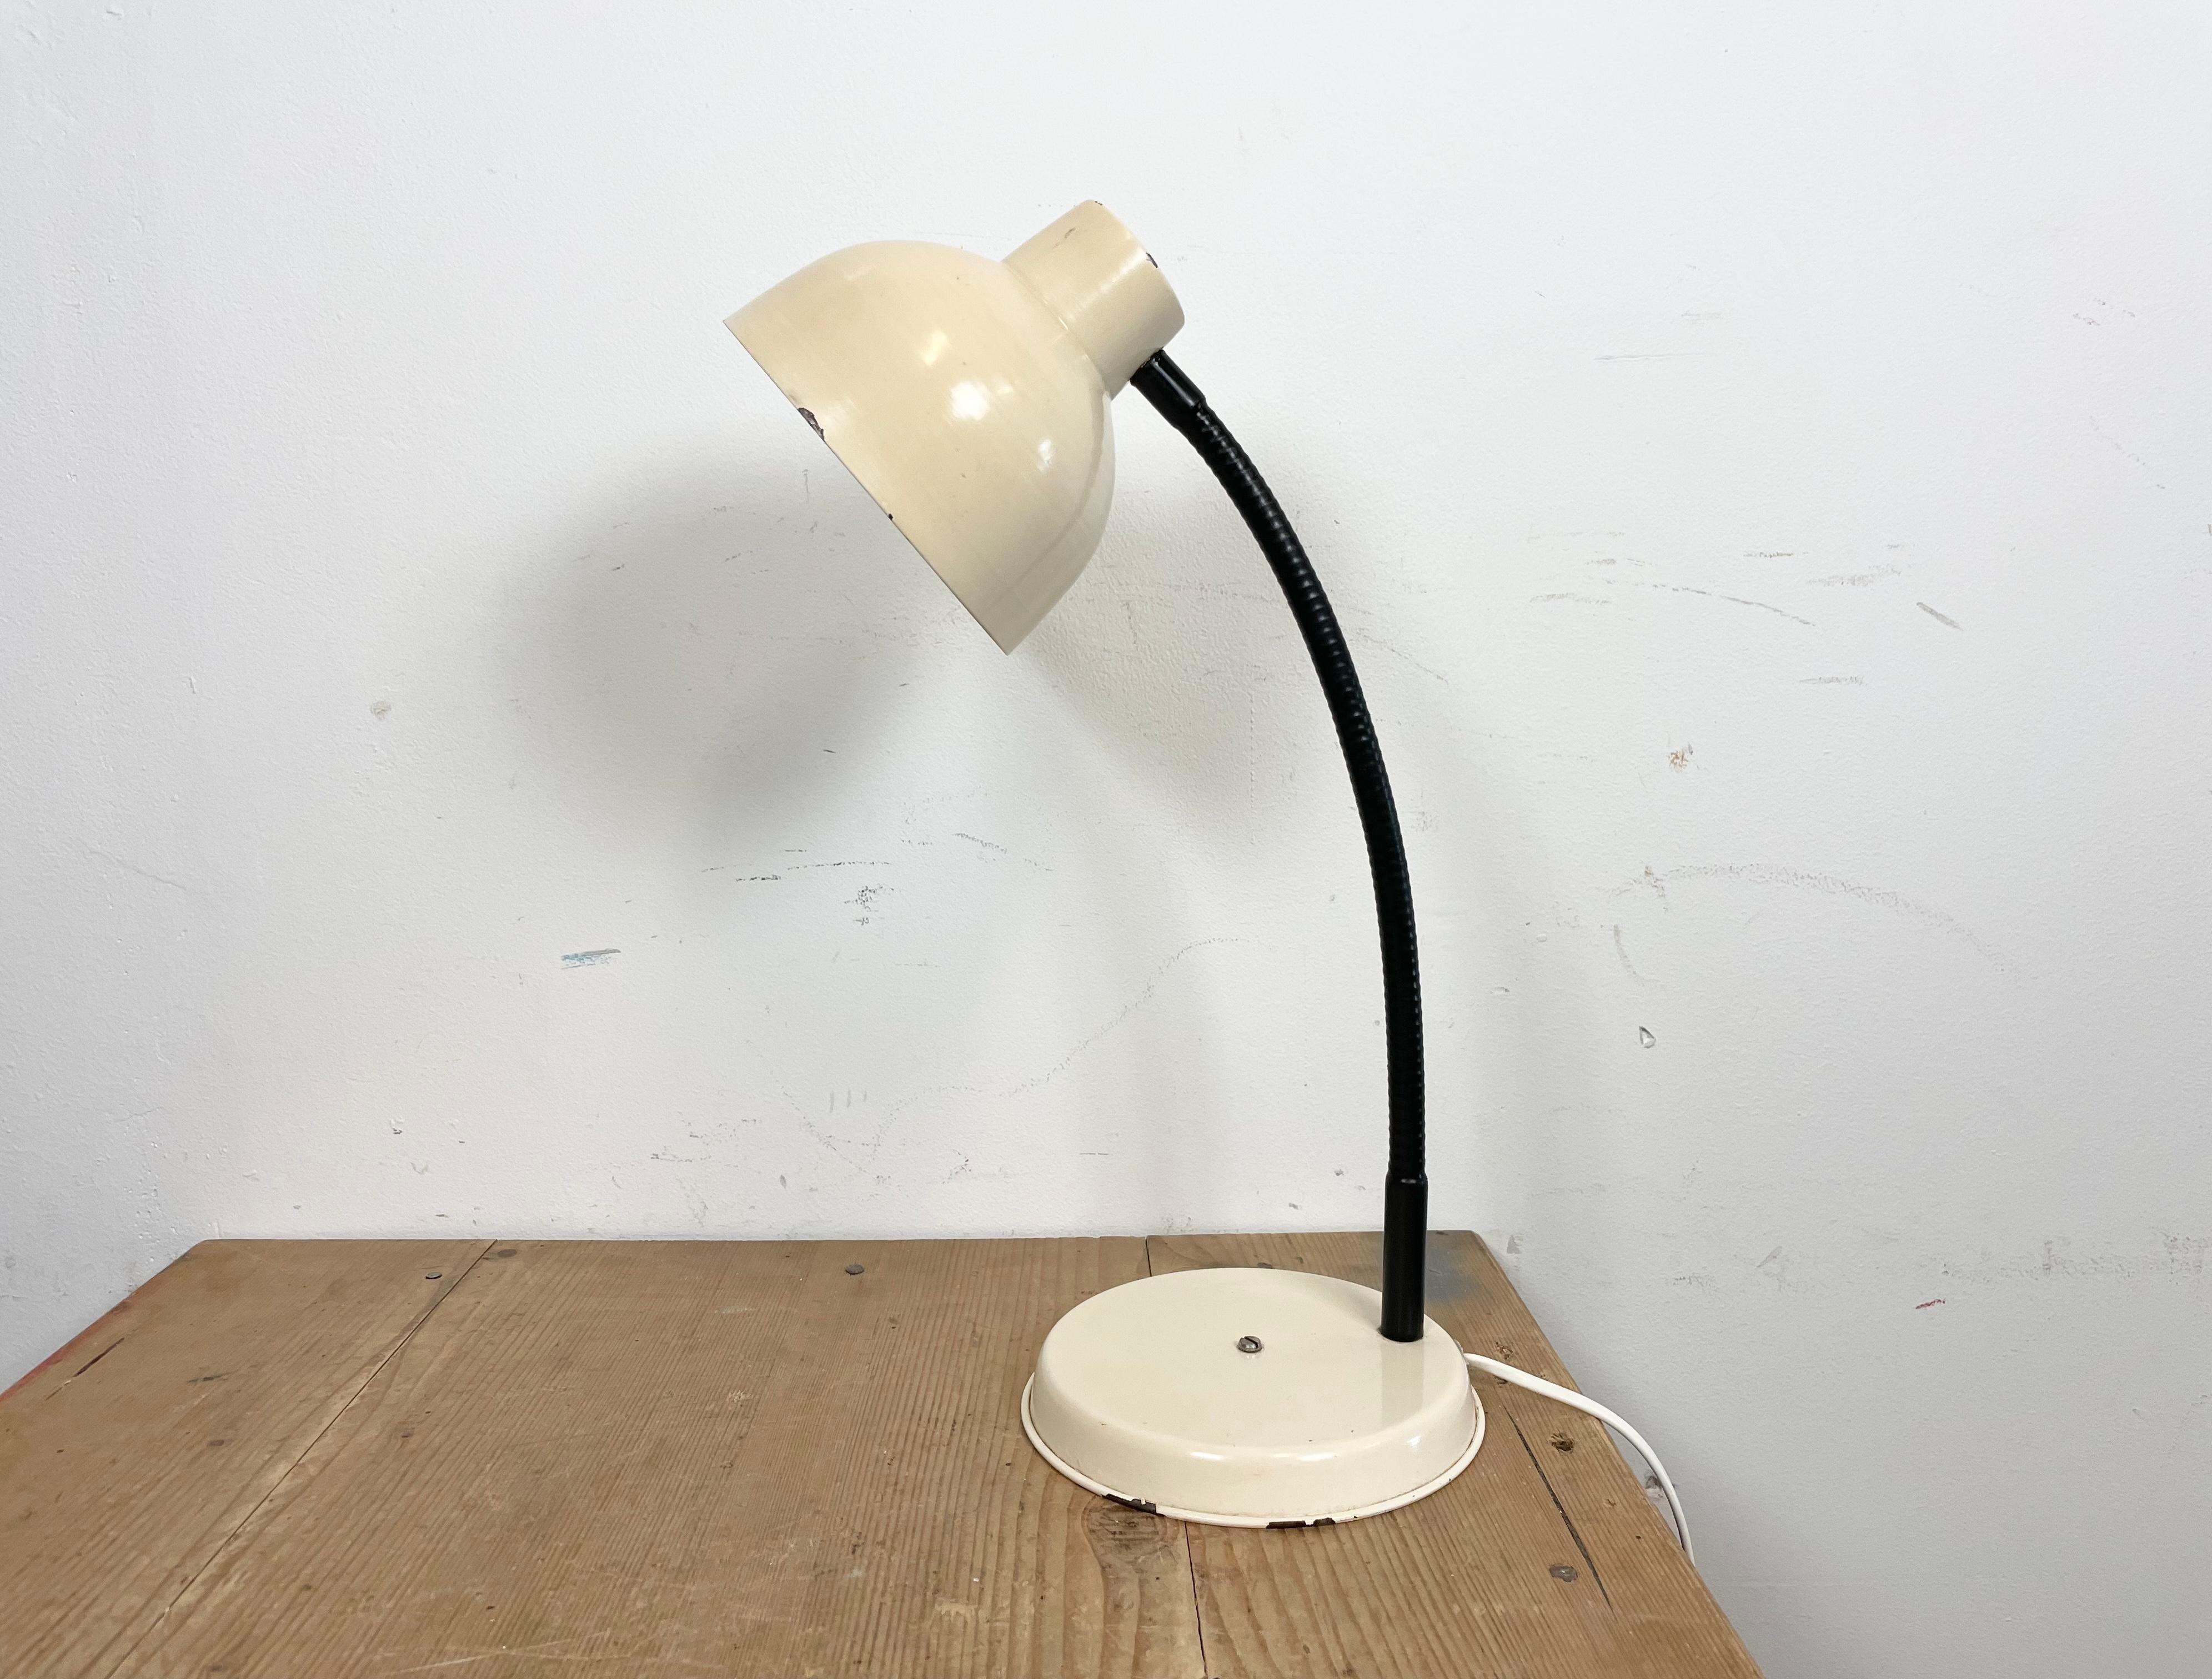 Industrial Workshop table lamp made in Poland during the 1960s.It features beige metal base and shade and black ruberized gooseneck. The original socket requires E27/E26 lightbulbs.
The diameter of the shade is 15 cm. Fully functional.